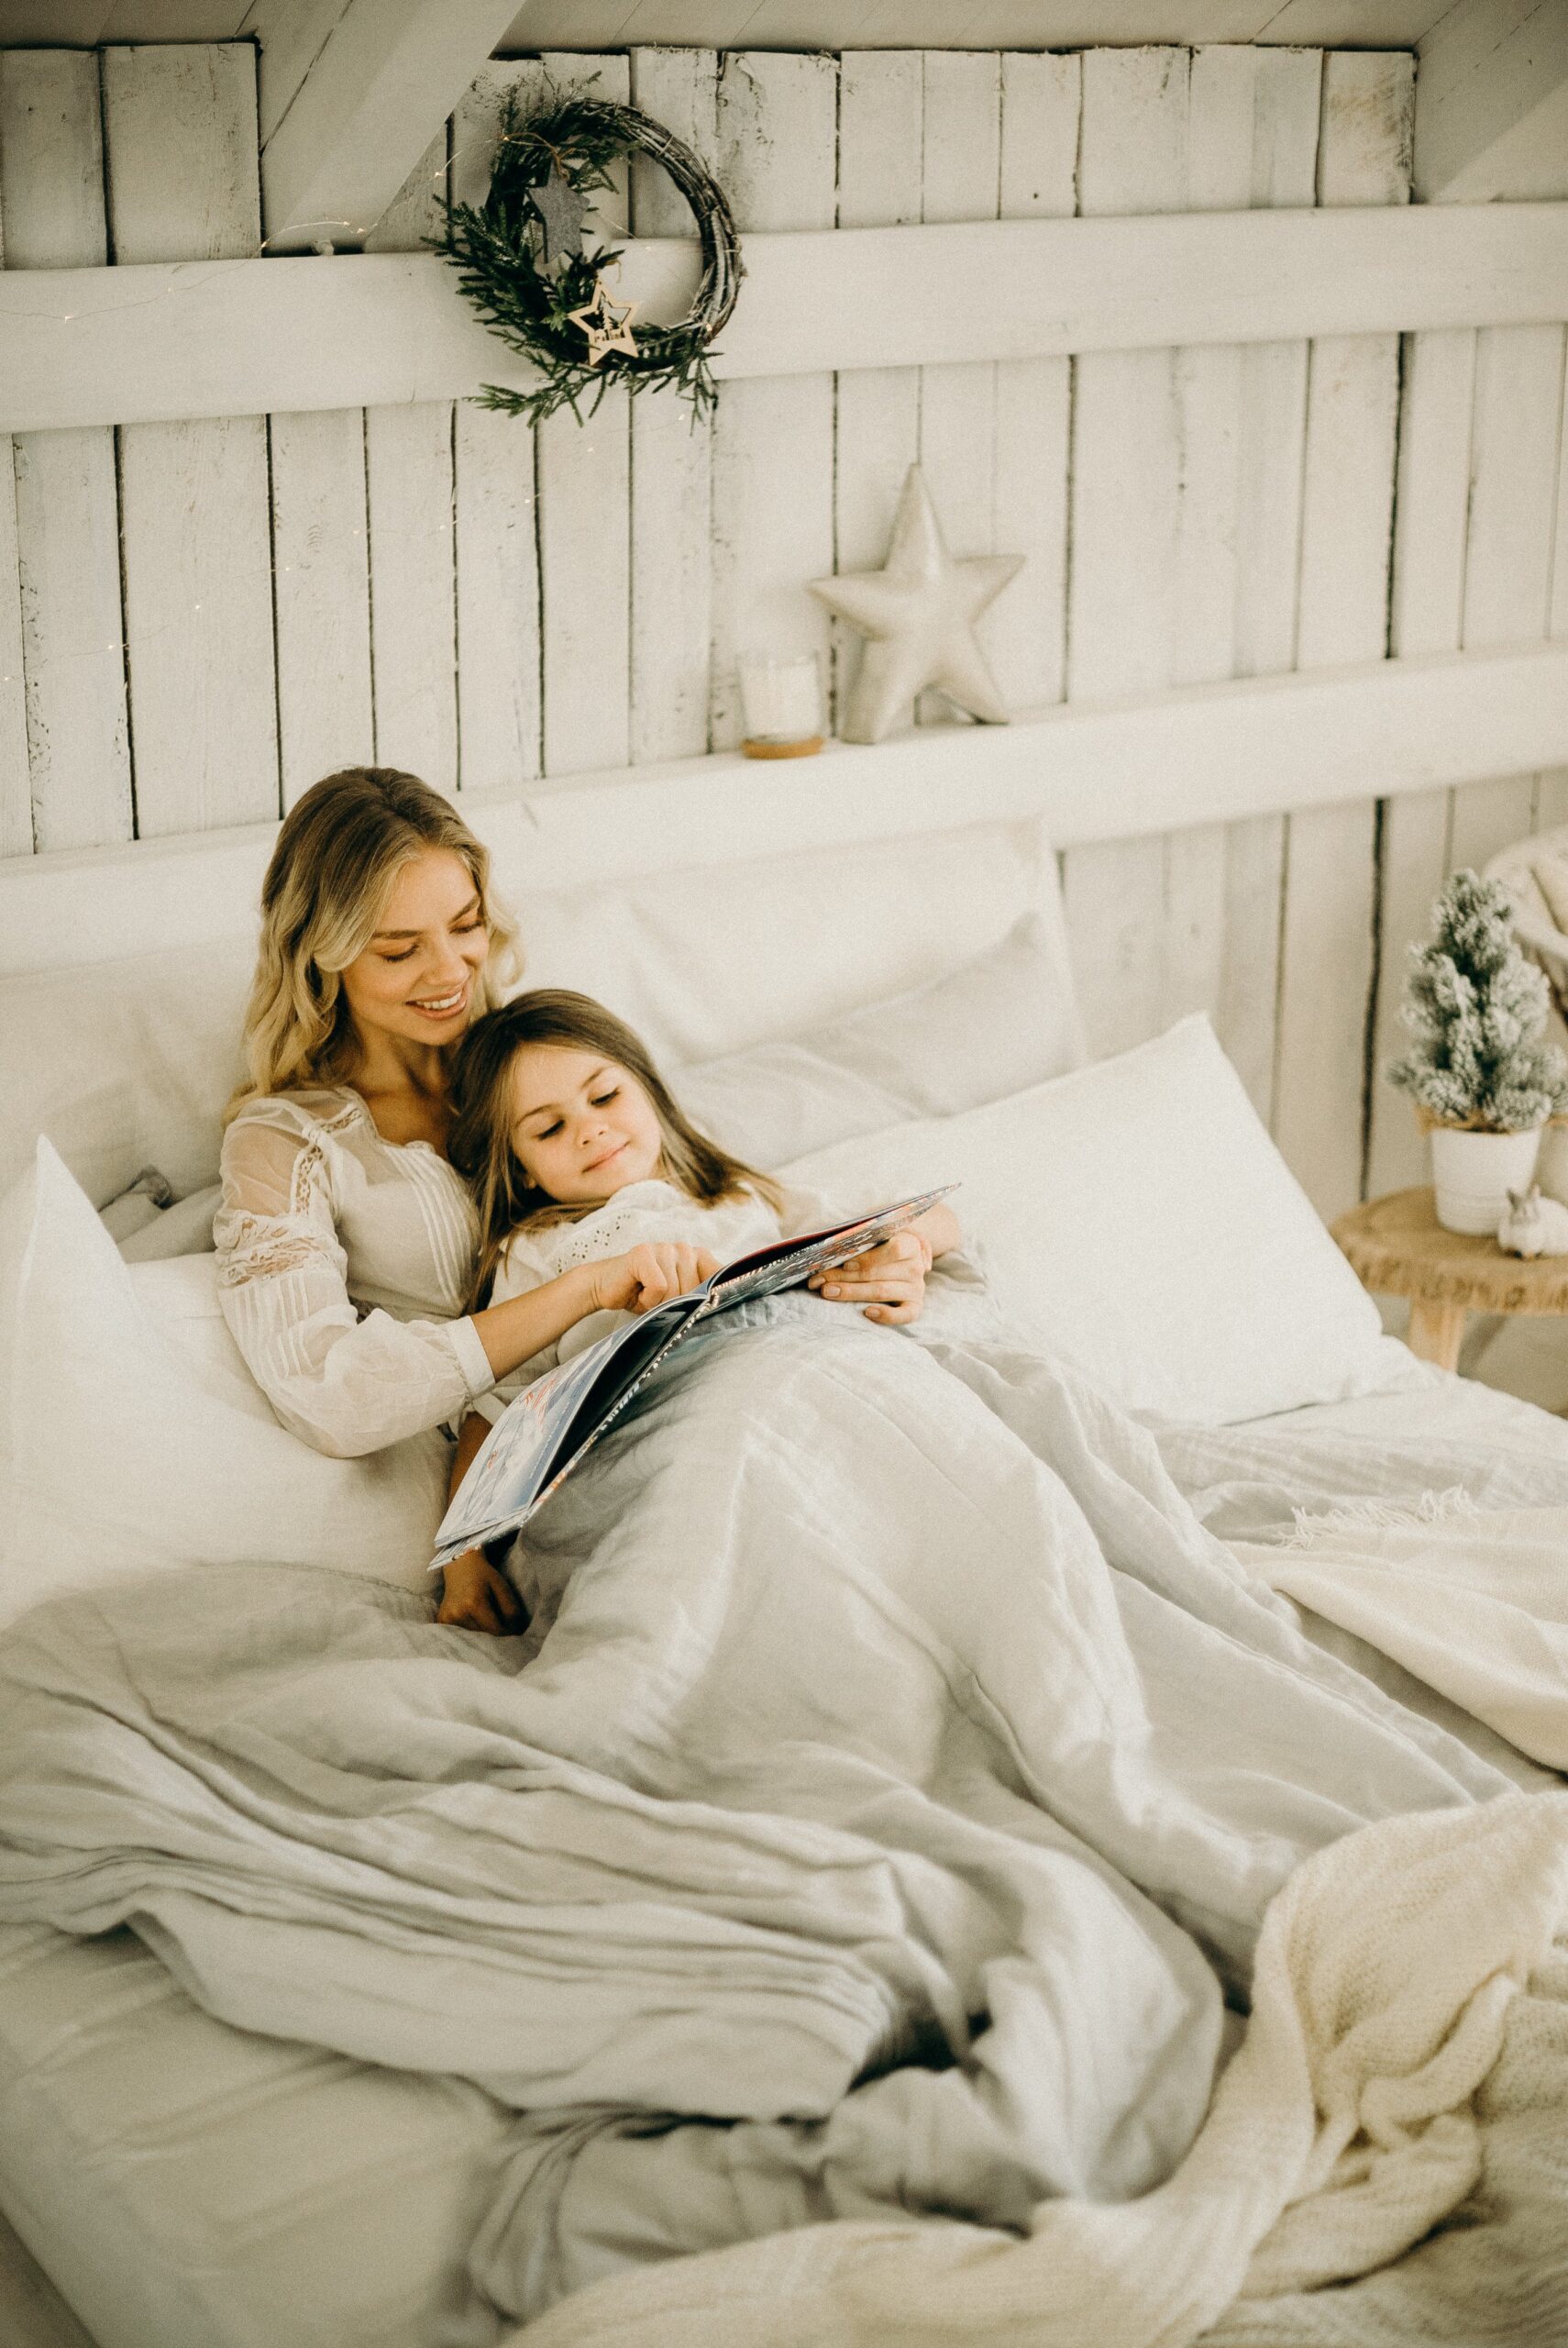 Mother and daughter snuggling reading a book in bed.